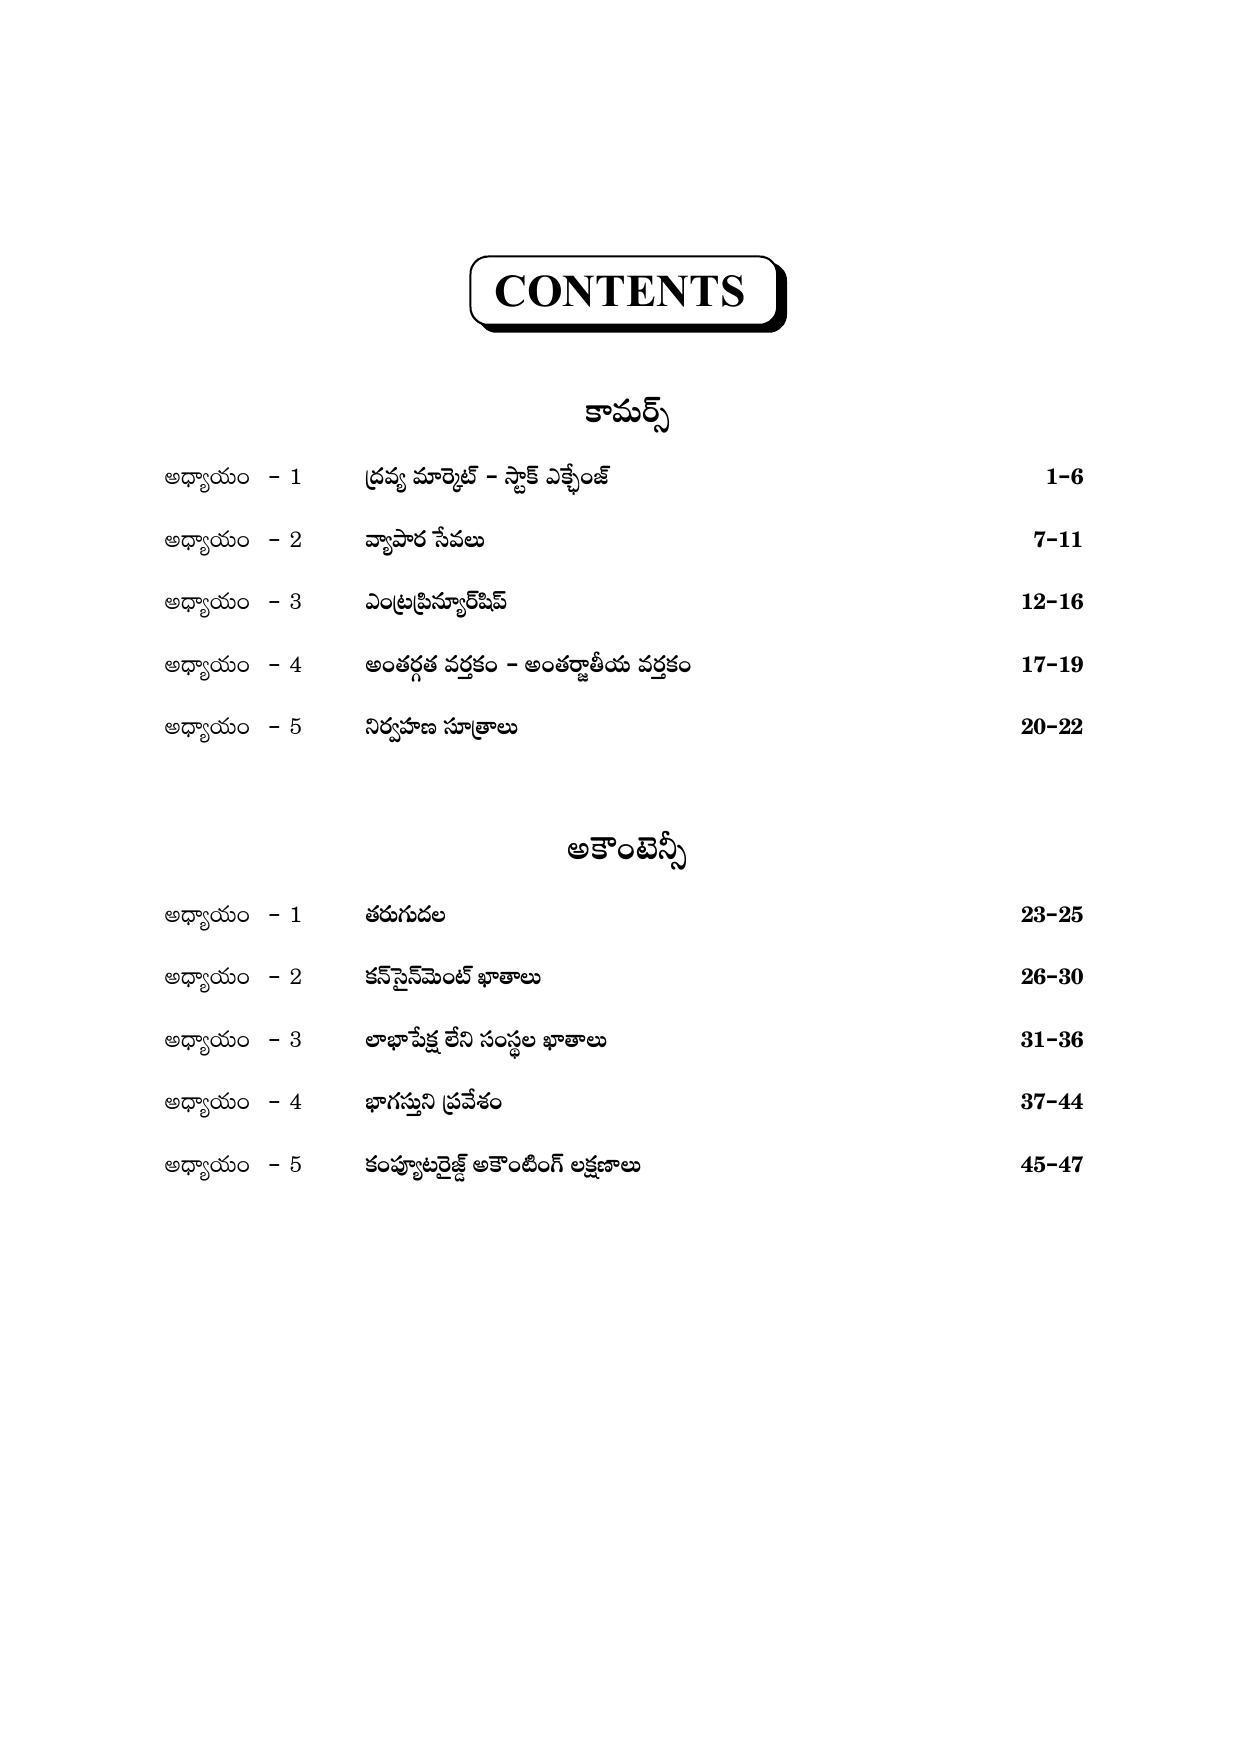 TS SCERT Inter 2nd Year Commerce &Accts II yr TM Path 1 (Telugu Medium) Text Book - Page 5